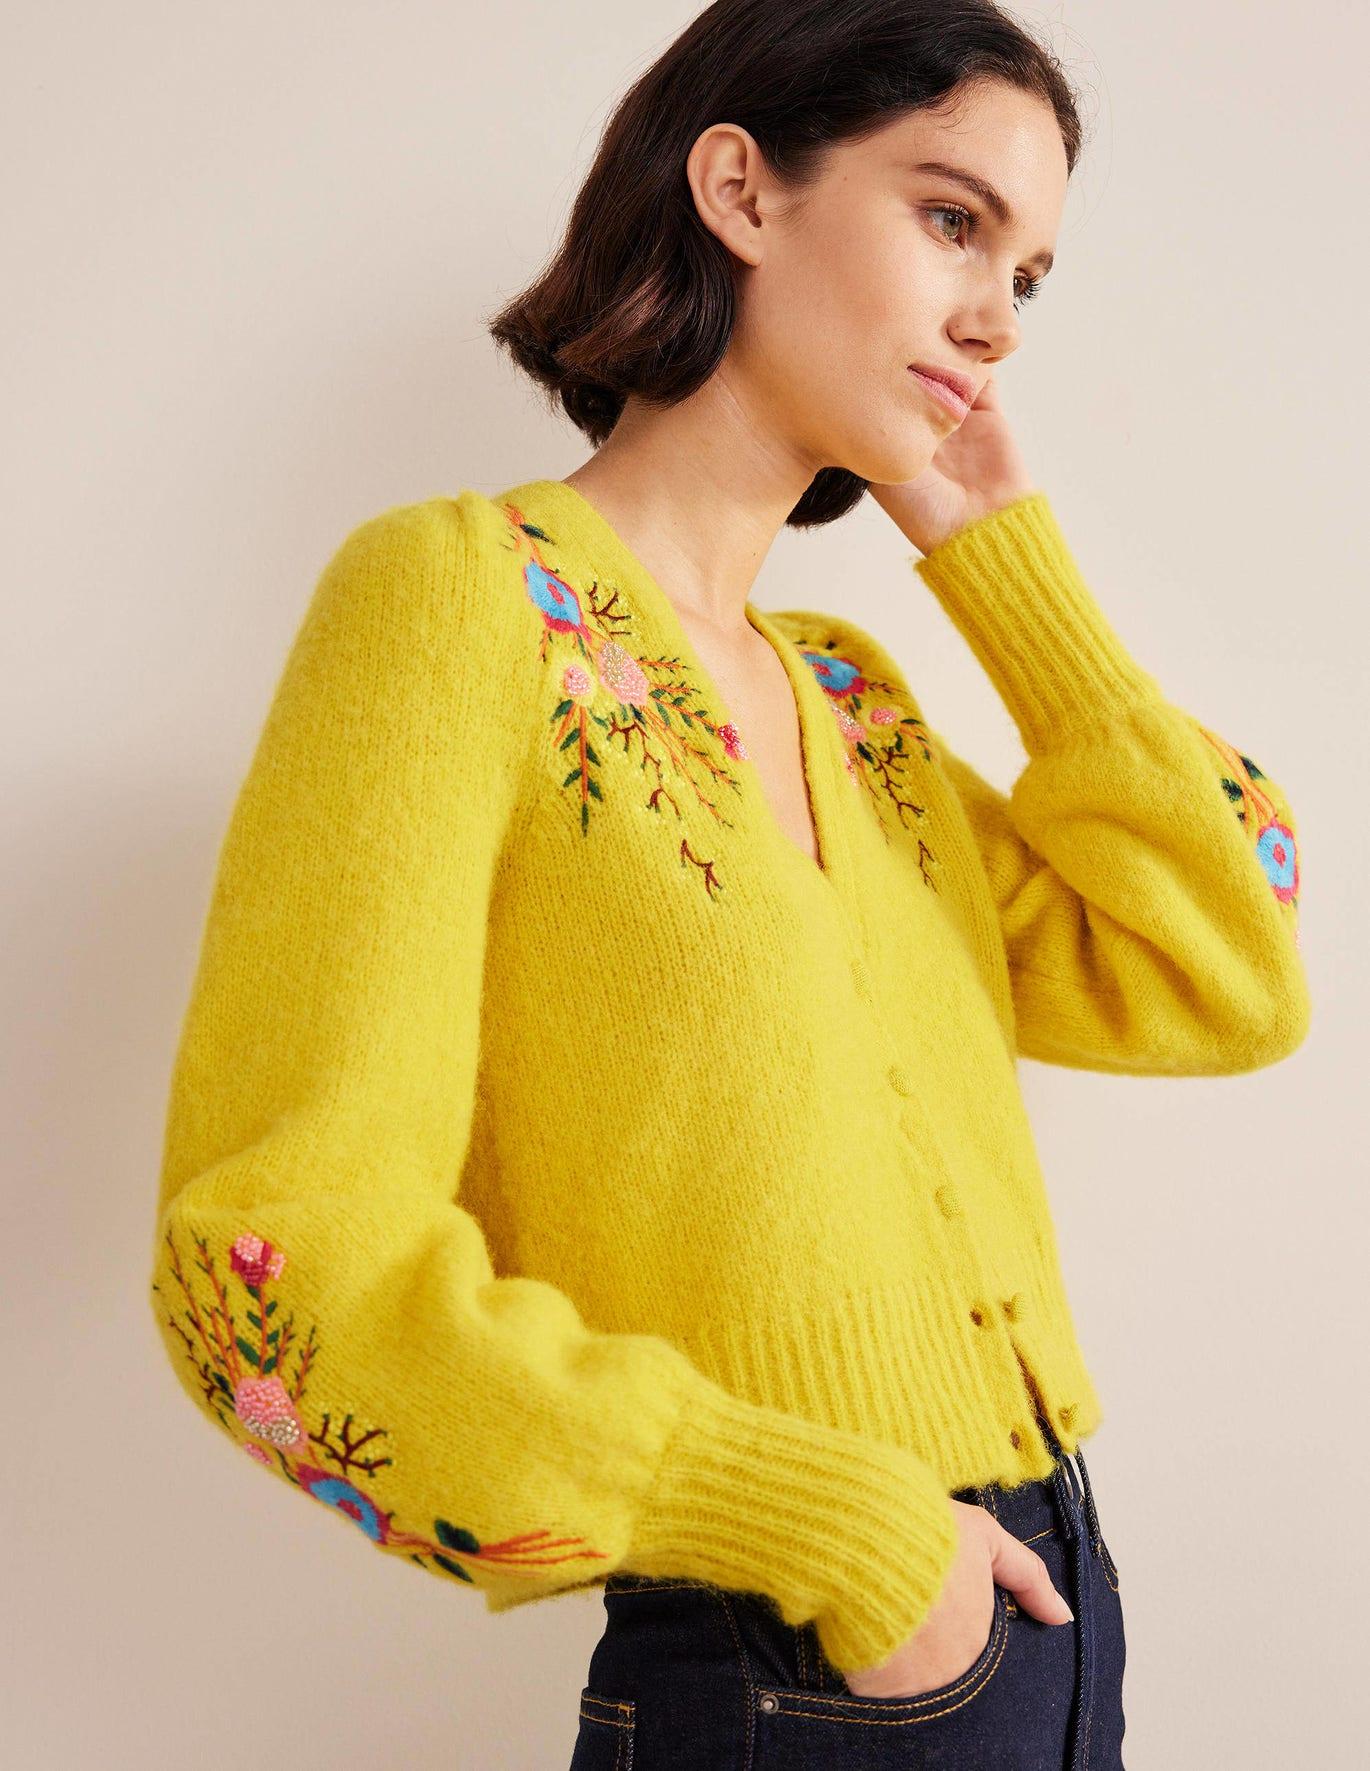 Boden Embroidered Floral Cardigan in Yellow | Lyst